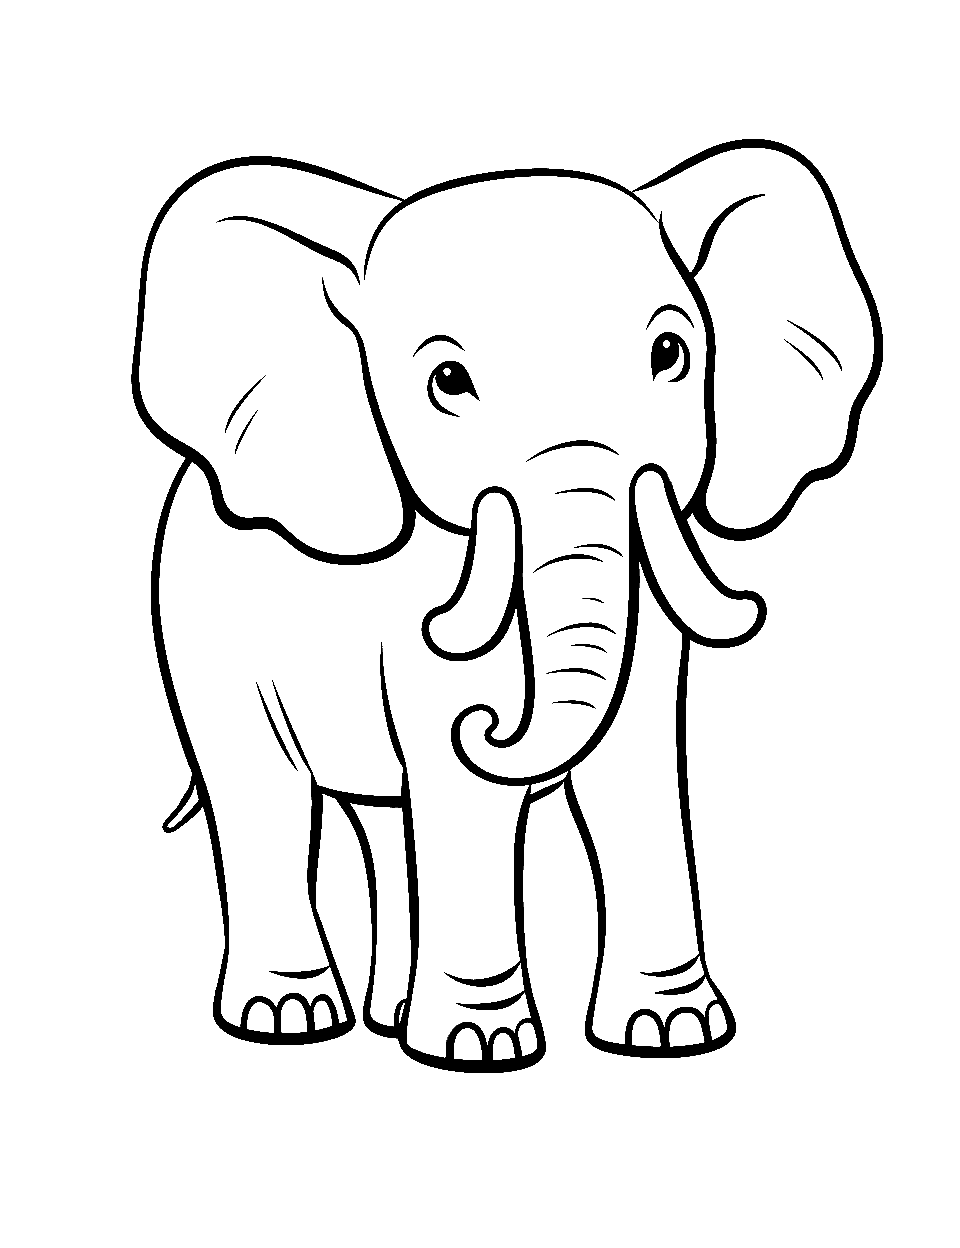 How to Draw an Elephant - Step by Step Elephant Drawing Tutorial - Easy  Peasy and Fun